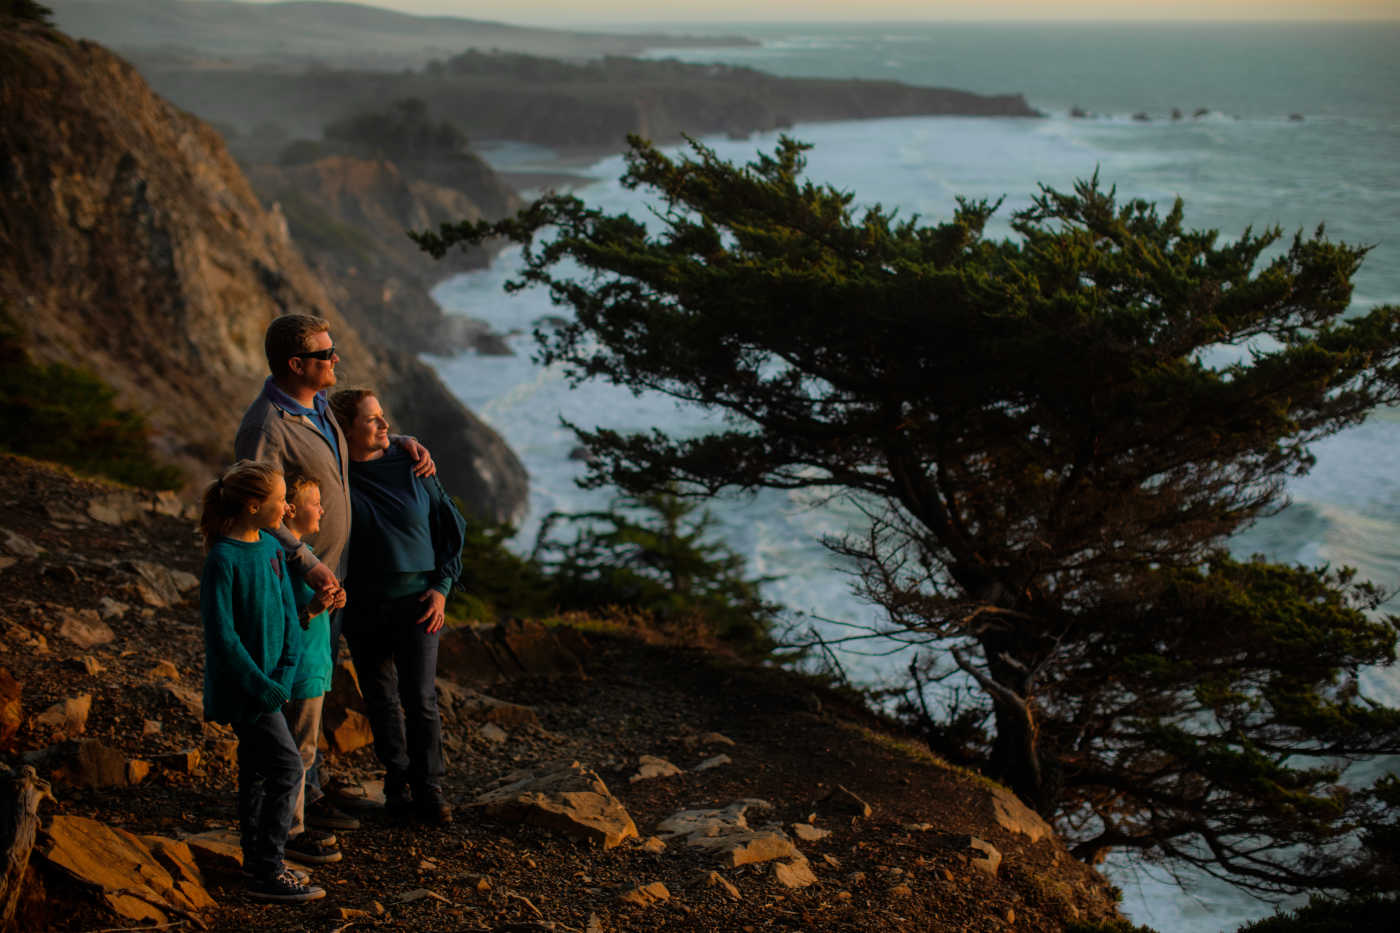 Four family members look out at the ocean from a clifftop perch.